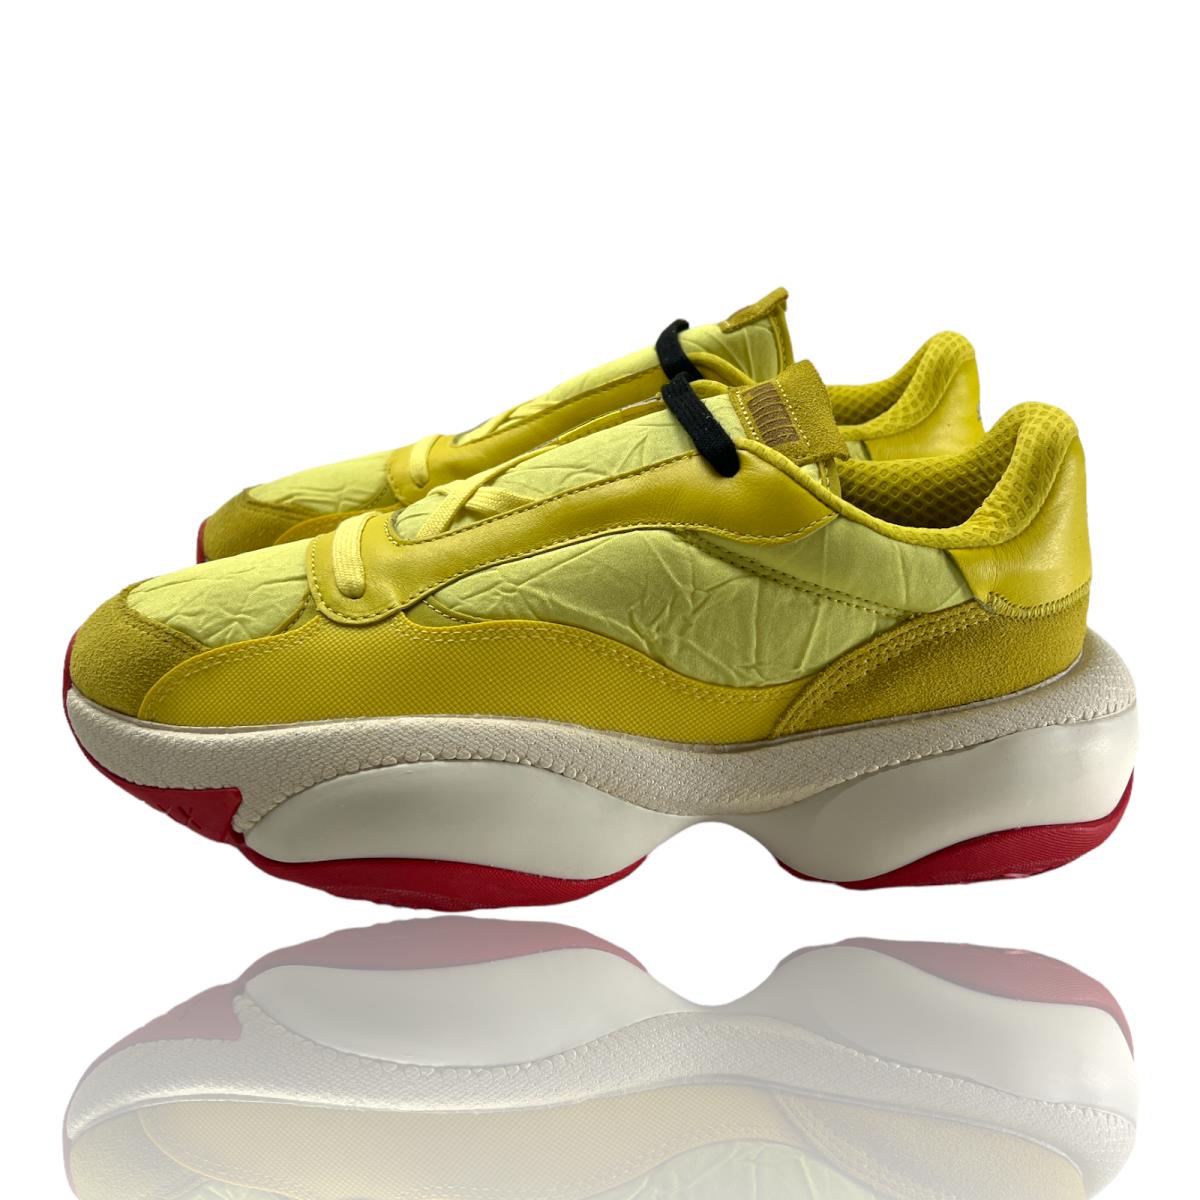 Puma Alteration PN-1 Mens Low Top Sneakers Celery Limelight Size 10 US - Yellow